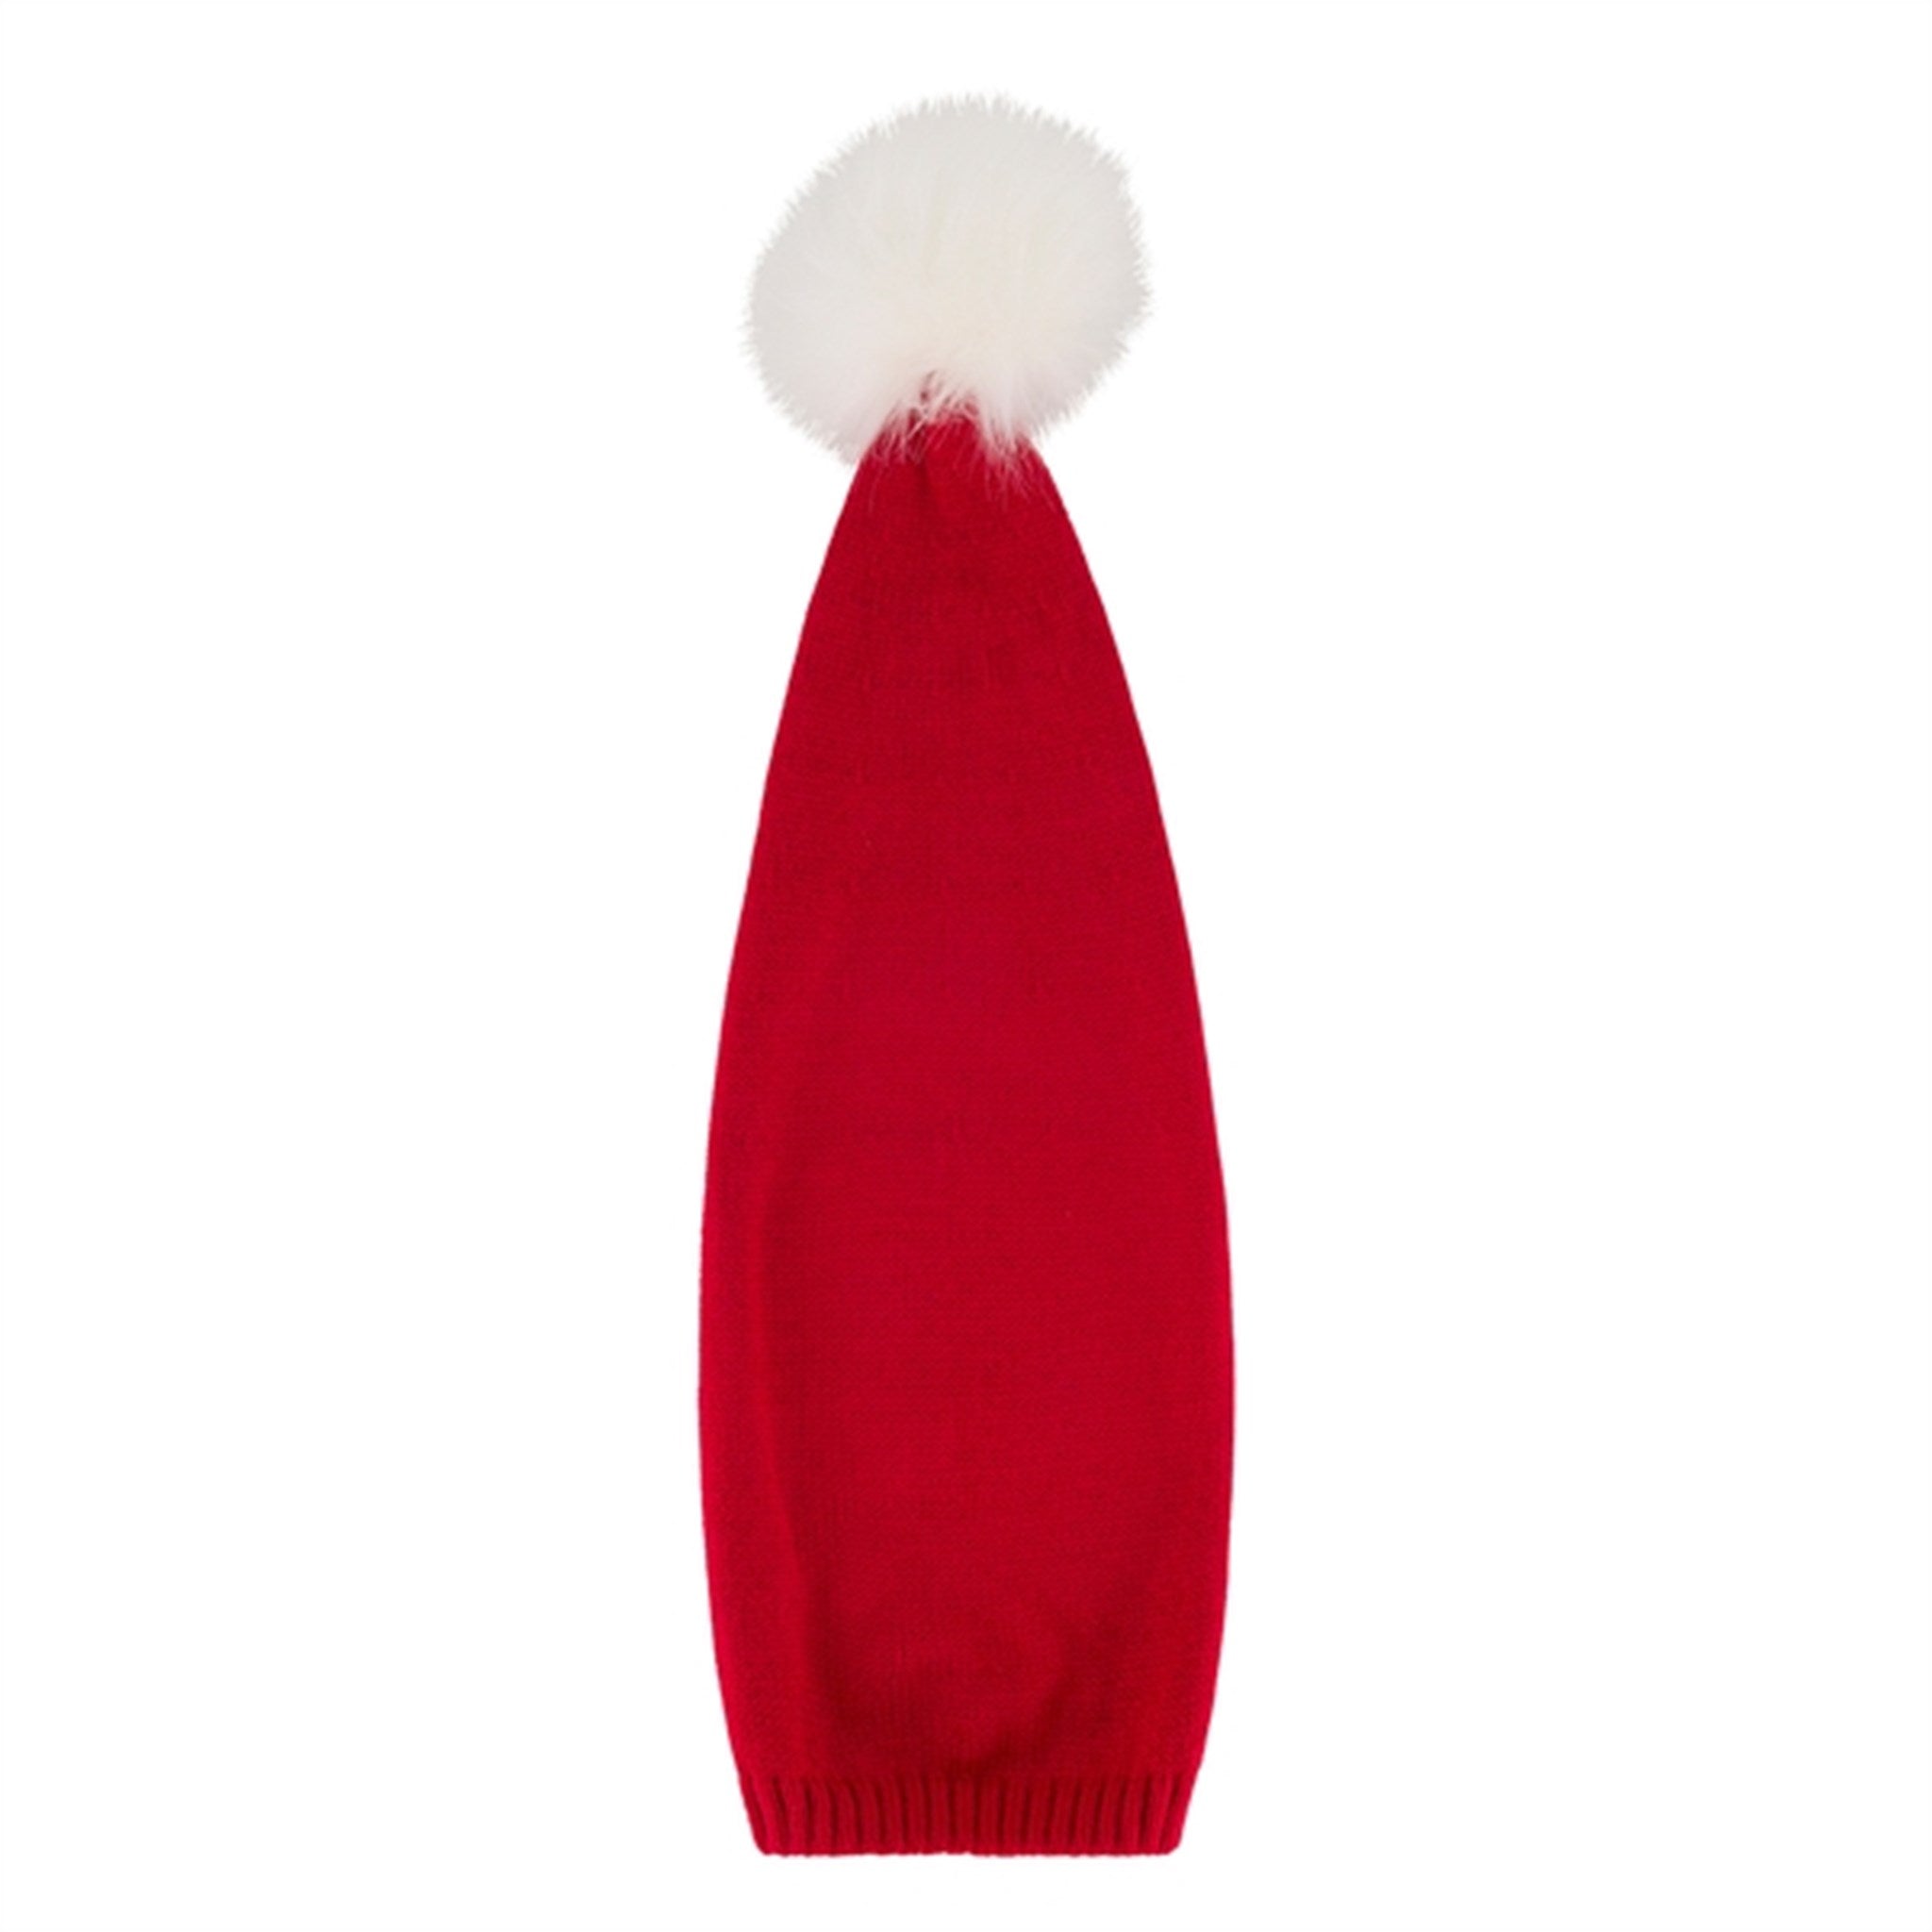 The New Chili Pepper Holiday Long Hat